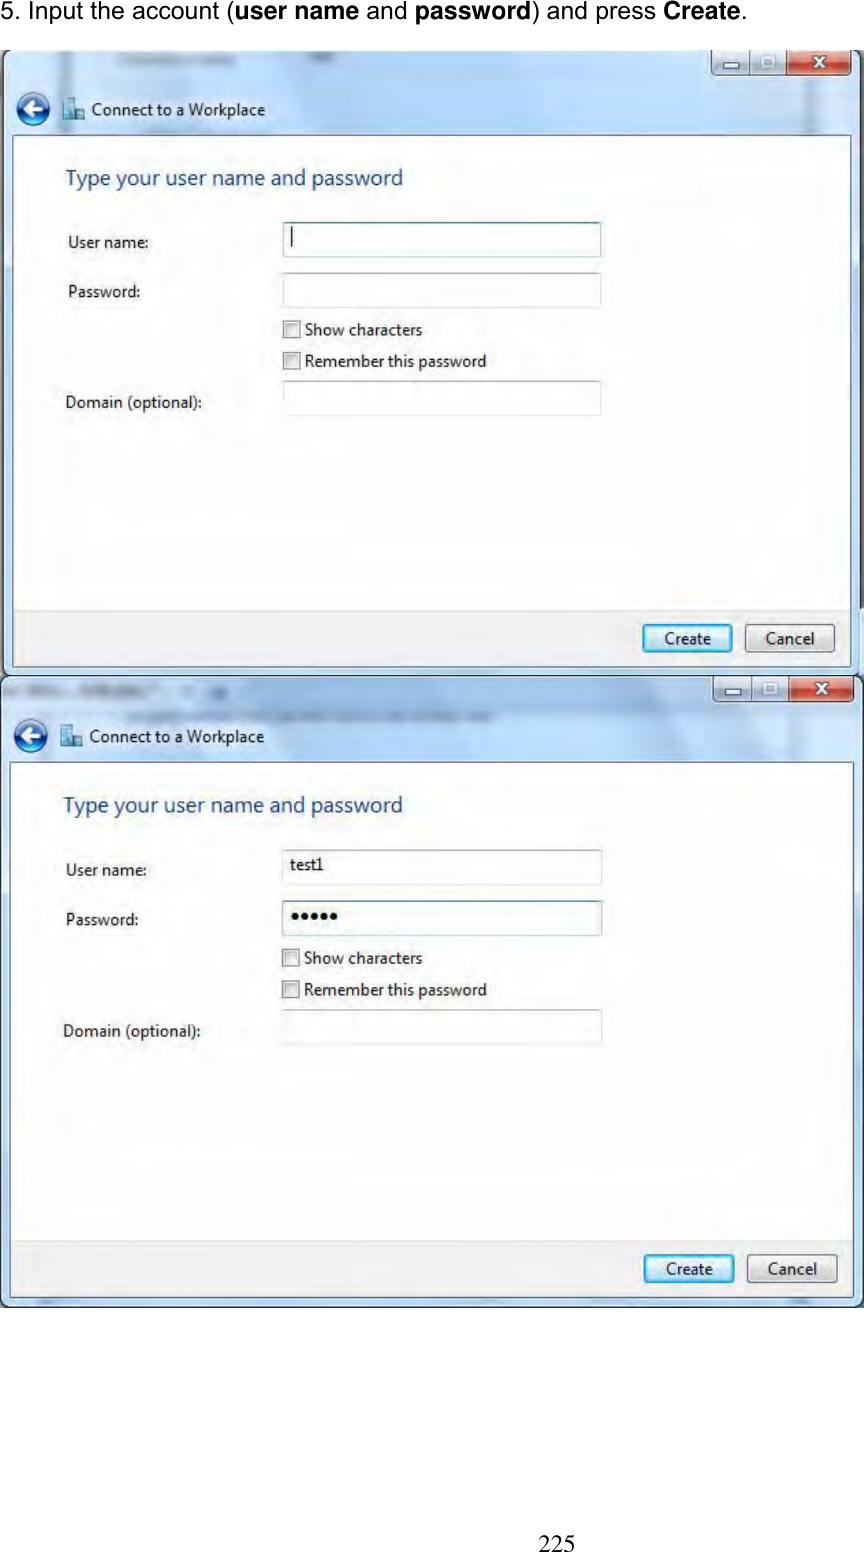 2255. Input the account (user name and password) and press Create.